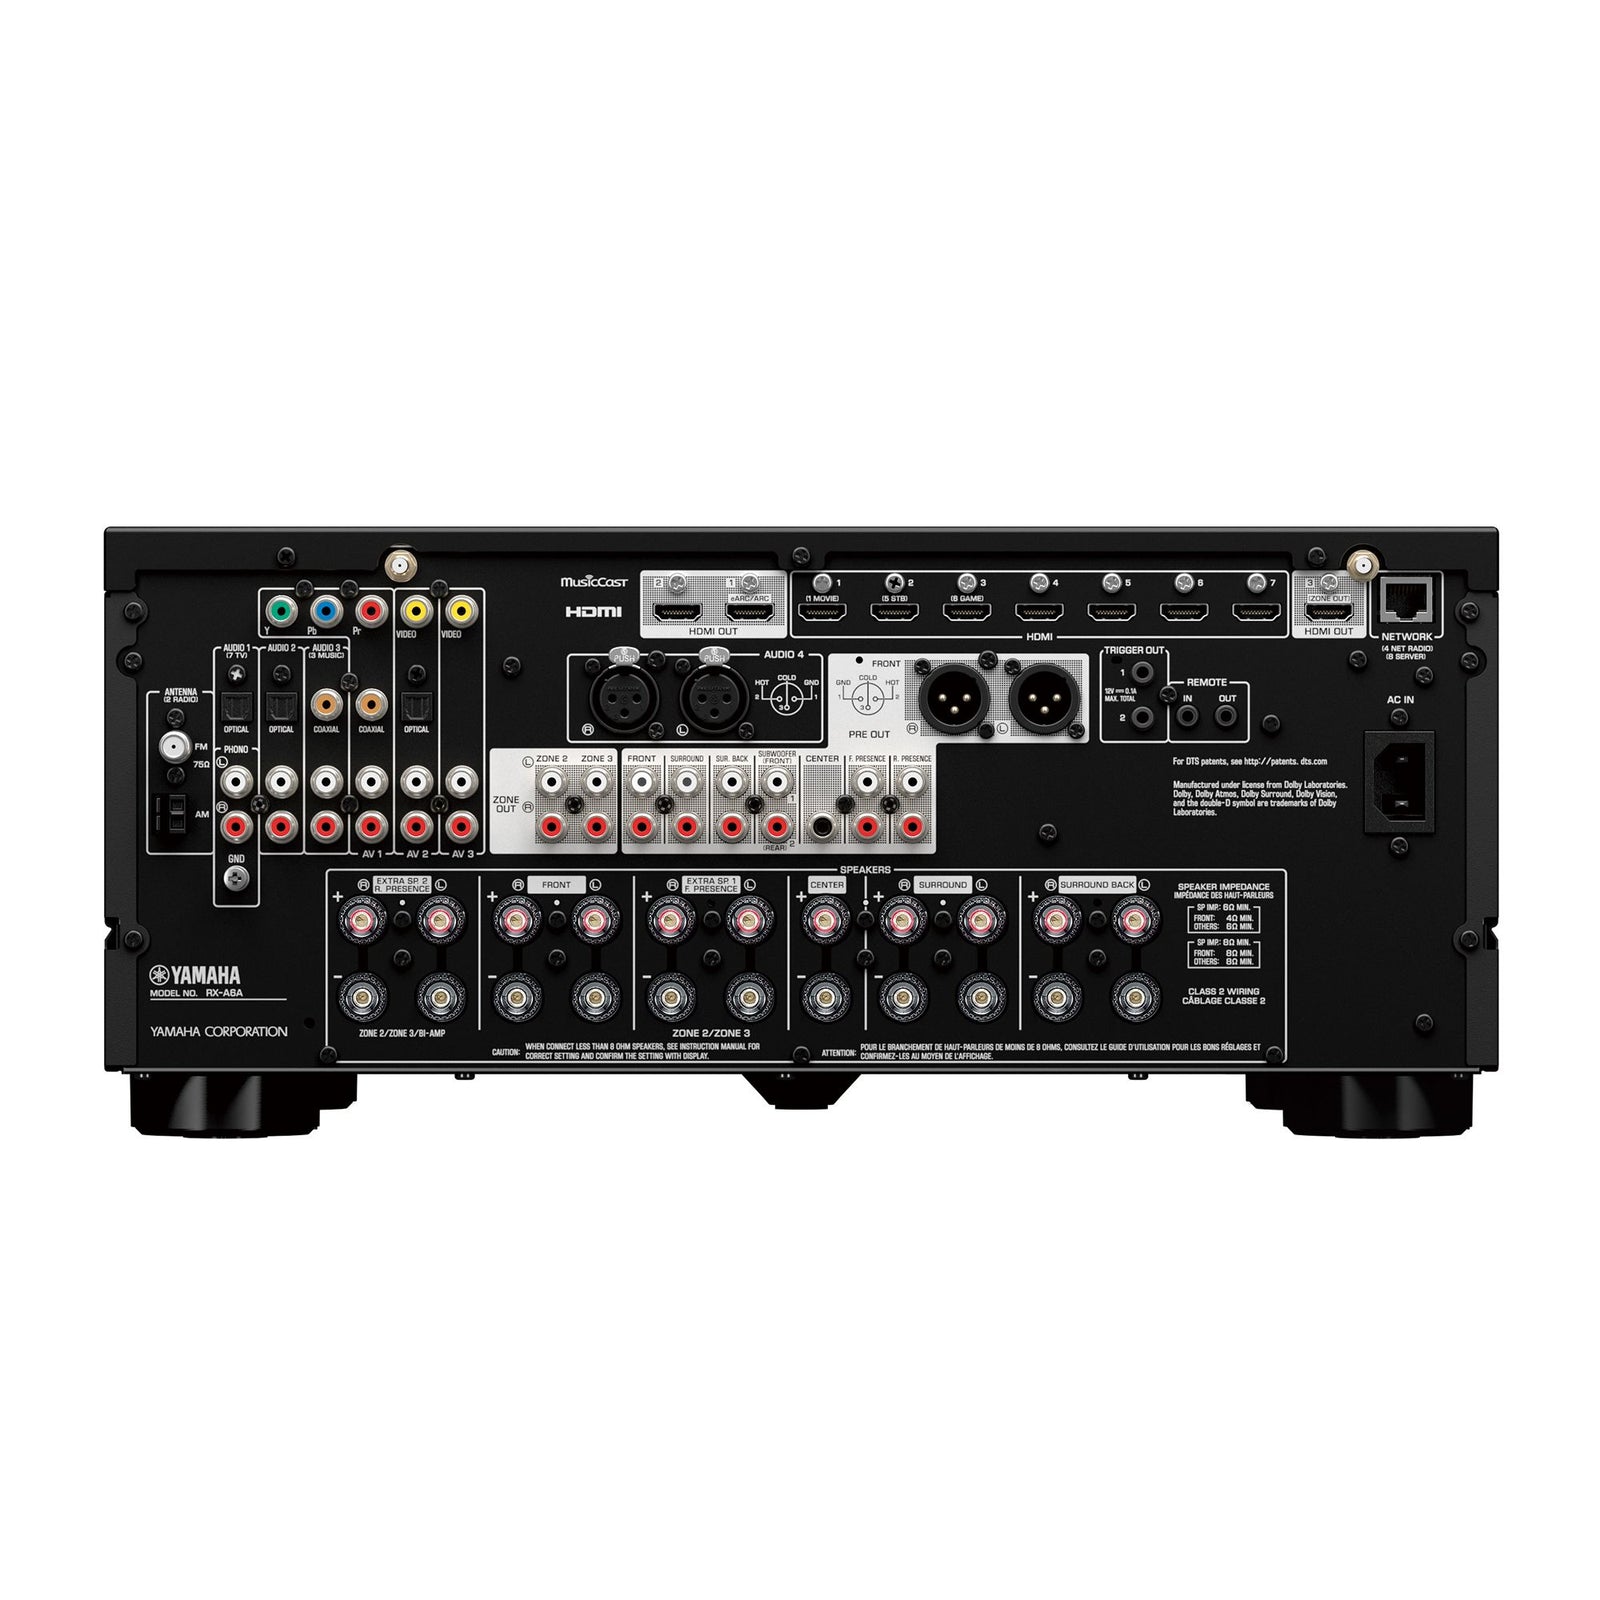 YAMAHA RX-A6A - AVENTAGE AV RECEIVERS | VINYL SOUND - 9.2 ch AVENTAGE with SURROUND:AI™, HDMI™ 7-in/3-out, the latest QCS407. 9.2 channel (with 11.2 channel processing) powerful surround sound with Zone2/3/4 Wi-Fi, Bluetooth®, AirPlay 2, Spotify Connect and MusicCast multi-room audio AURO-3D® Dolby Atmos® and DTS:X®